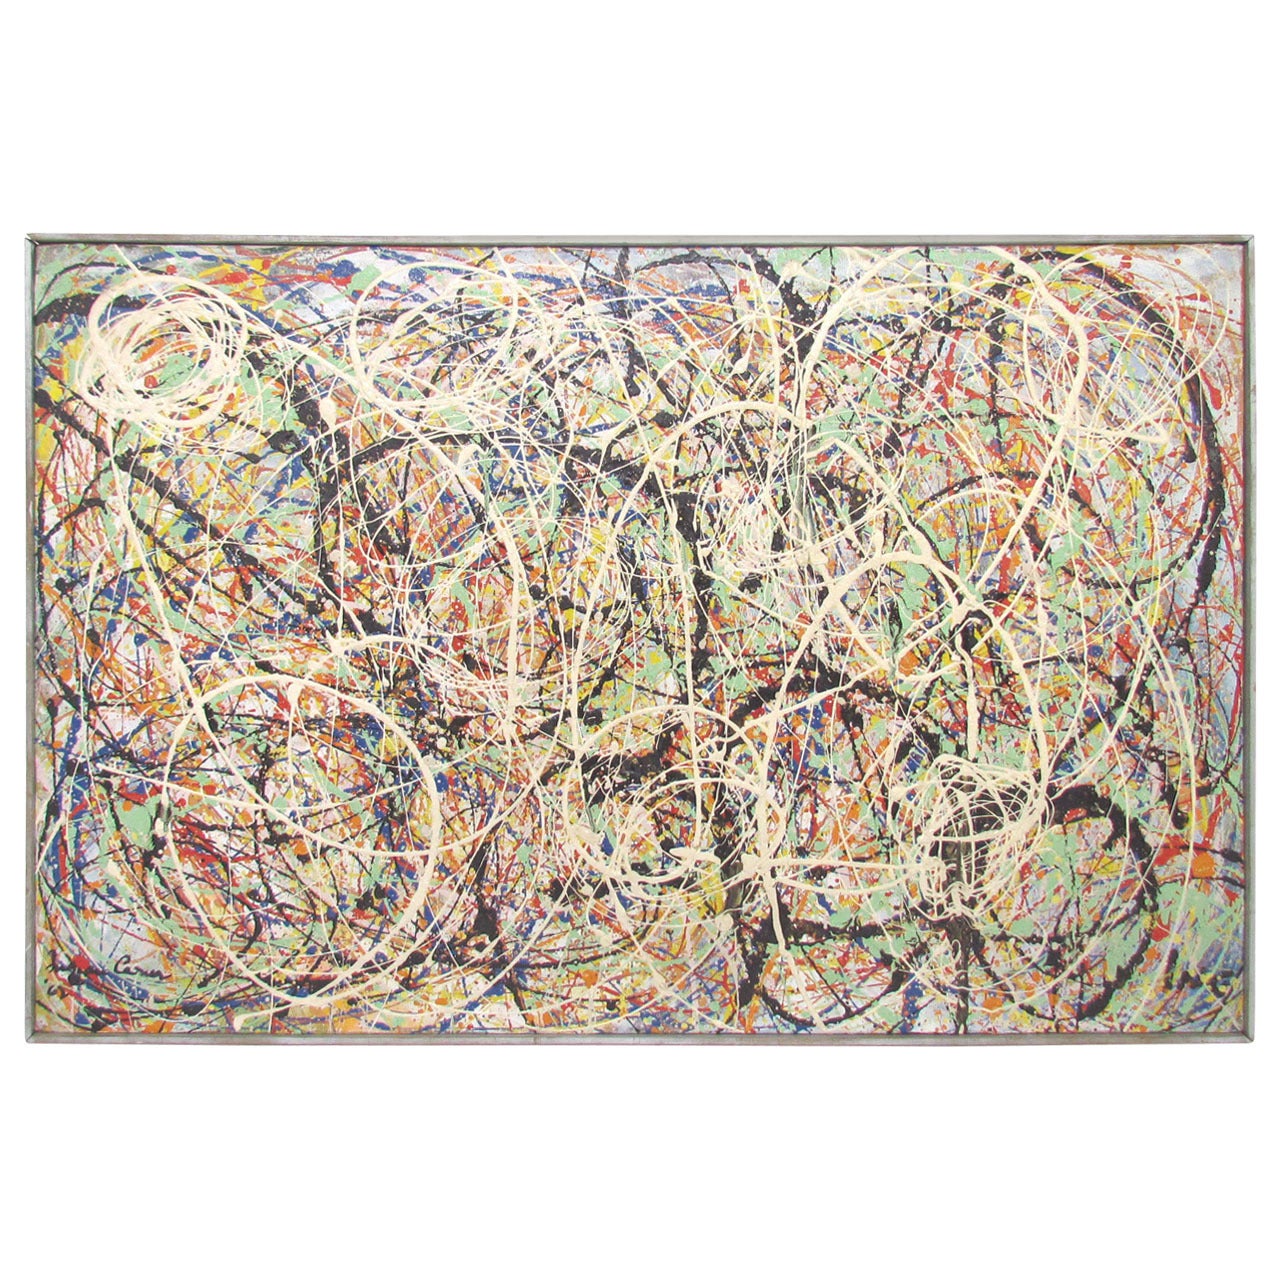 Abstract Expressionist Splatter and Drip Painting, Dated 1962